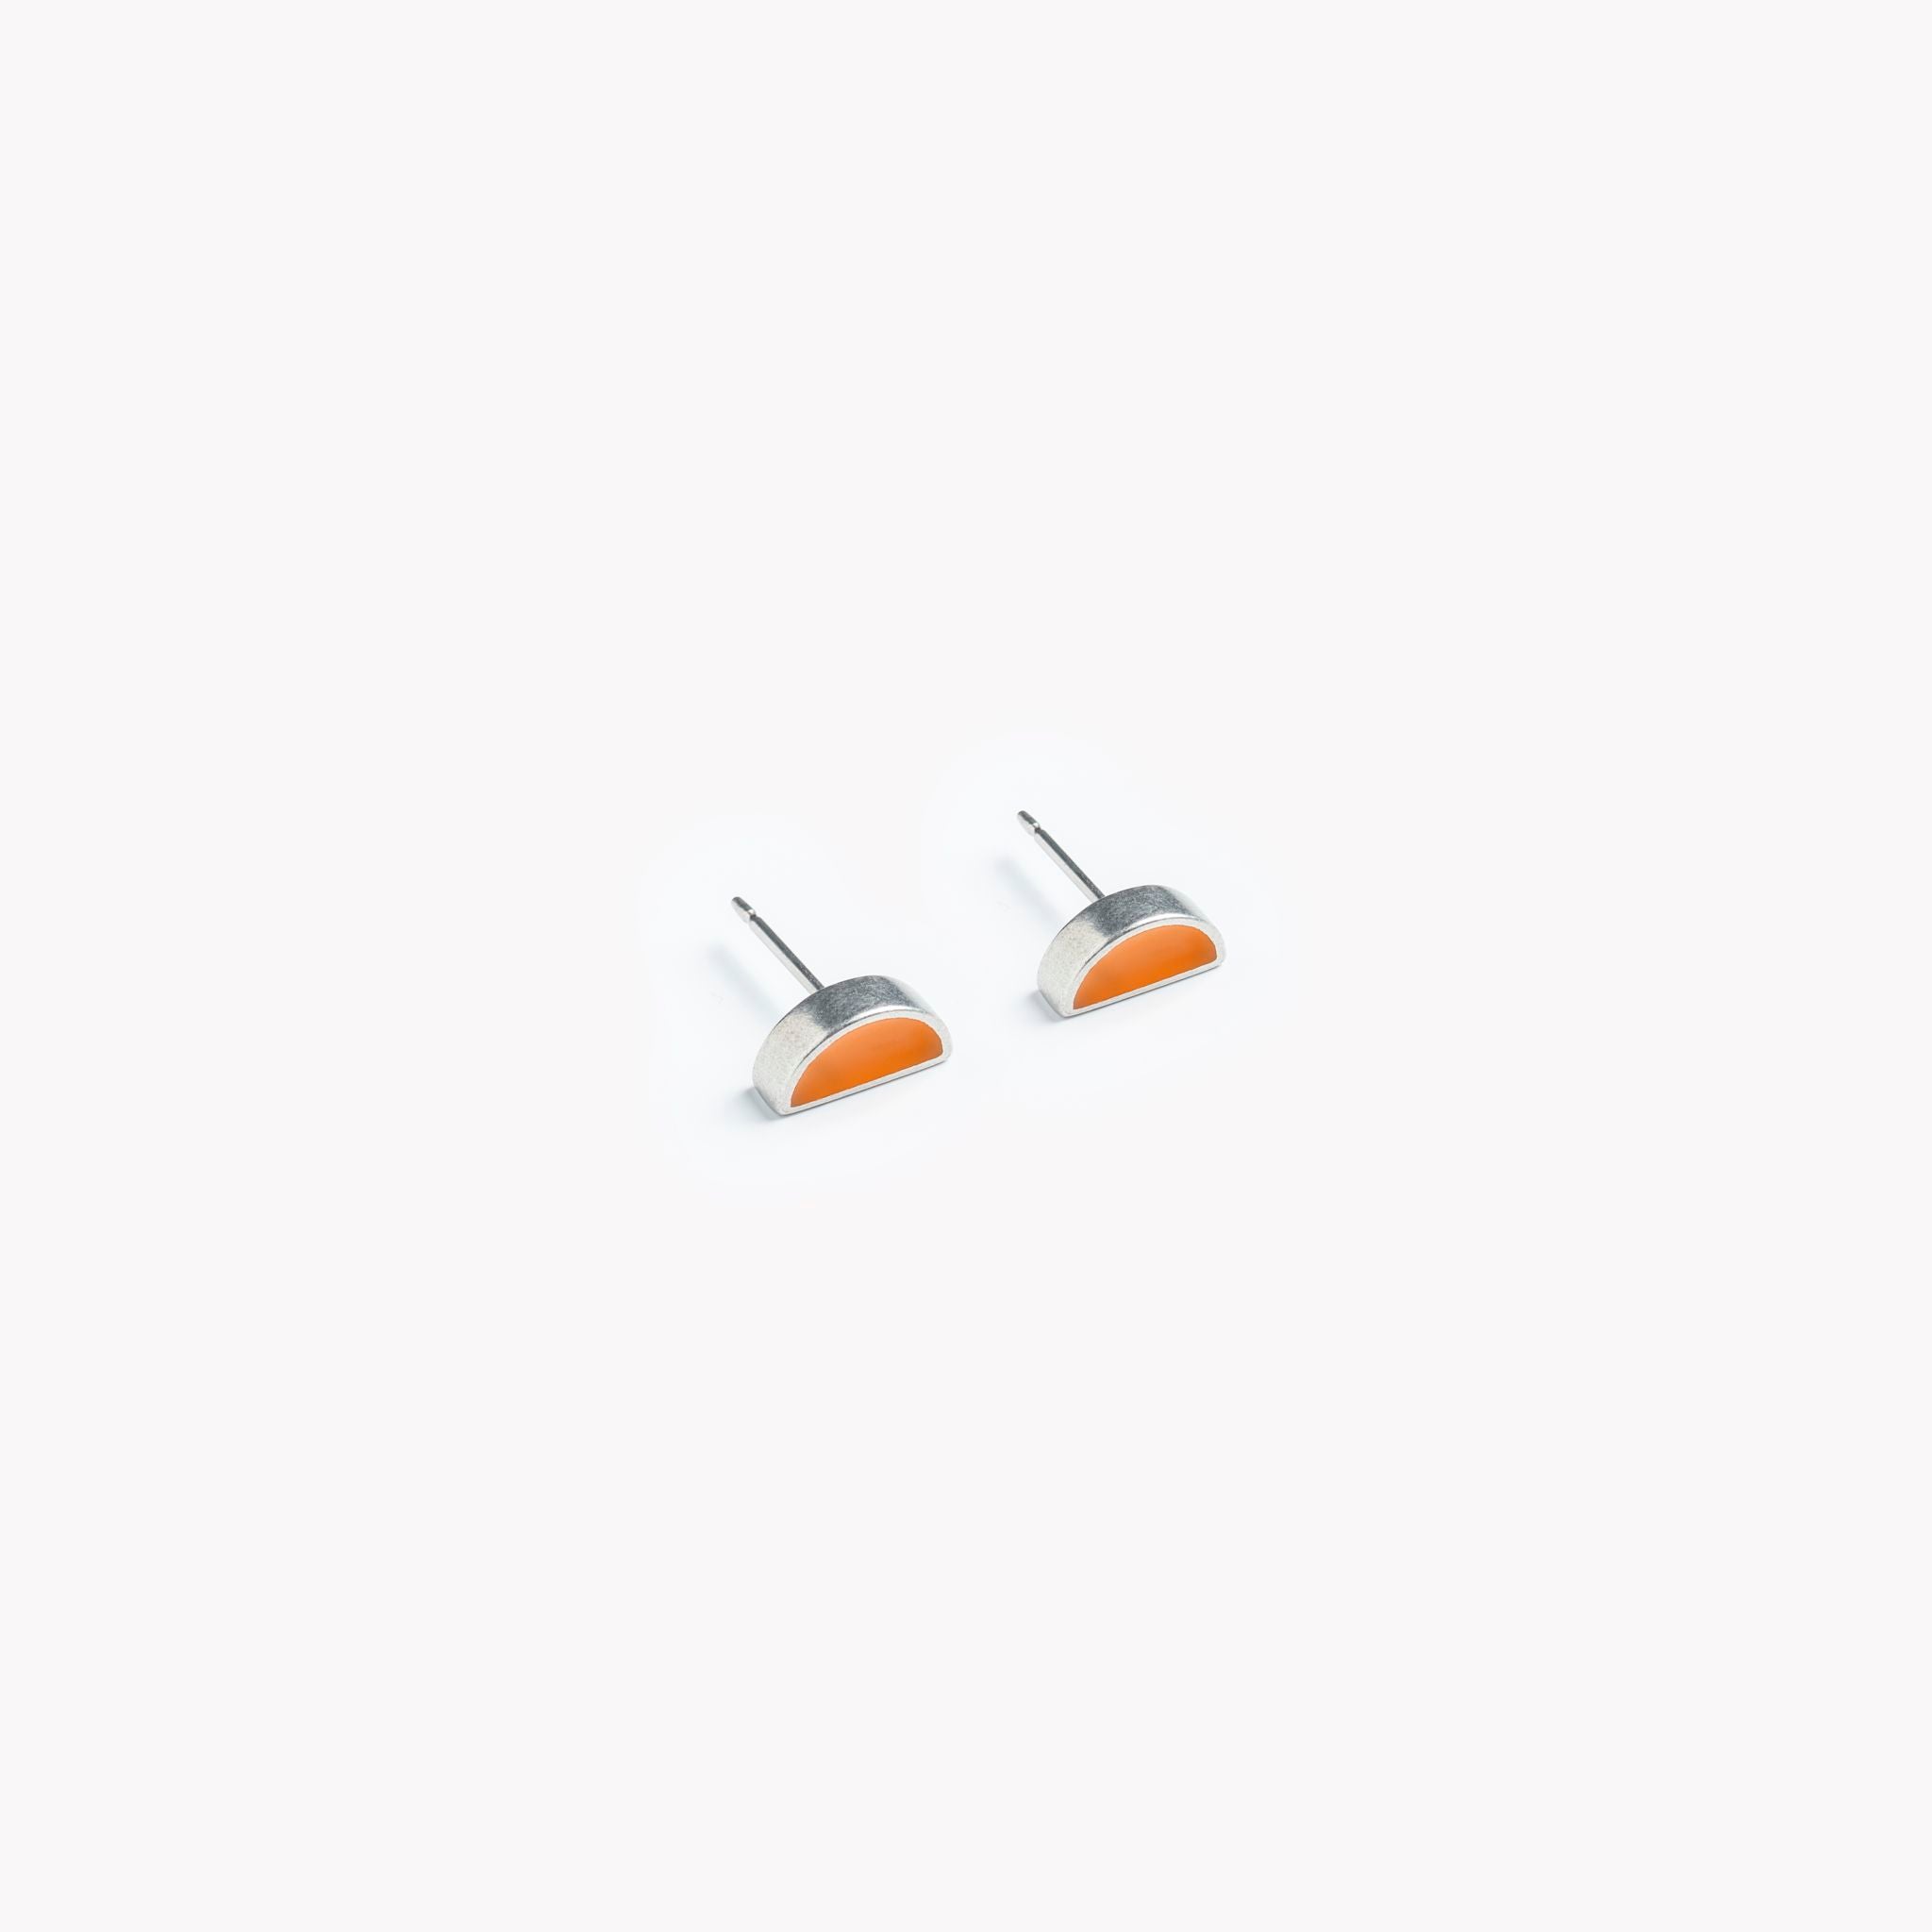 The image shows a brightly coloured pair of half circle shaped orange stud earrings. The orange inset is silky smooth and runs up to a brightly polished pewter edge and surround. Pictured on a crisp white background, the stud earrings are bathed in sunlight. This is a modern, colourful, minimal stud earring design.